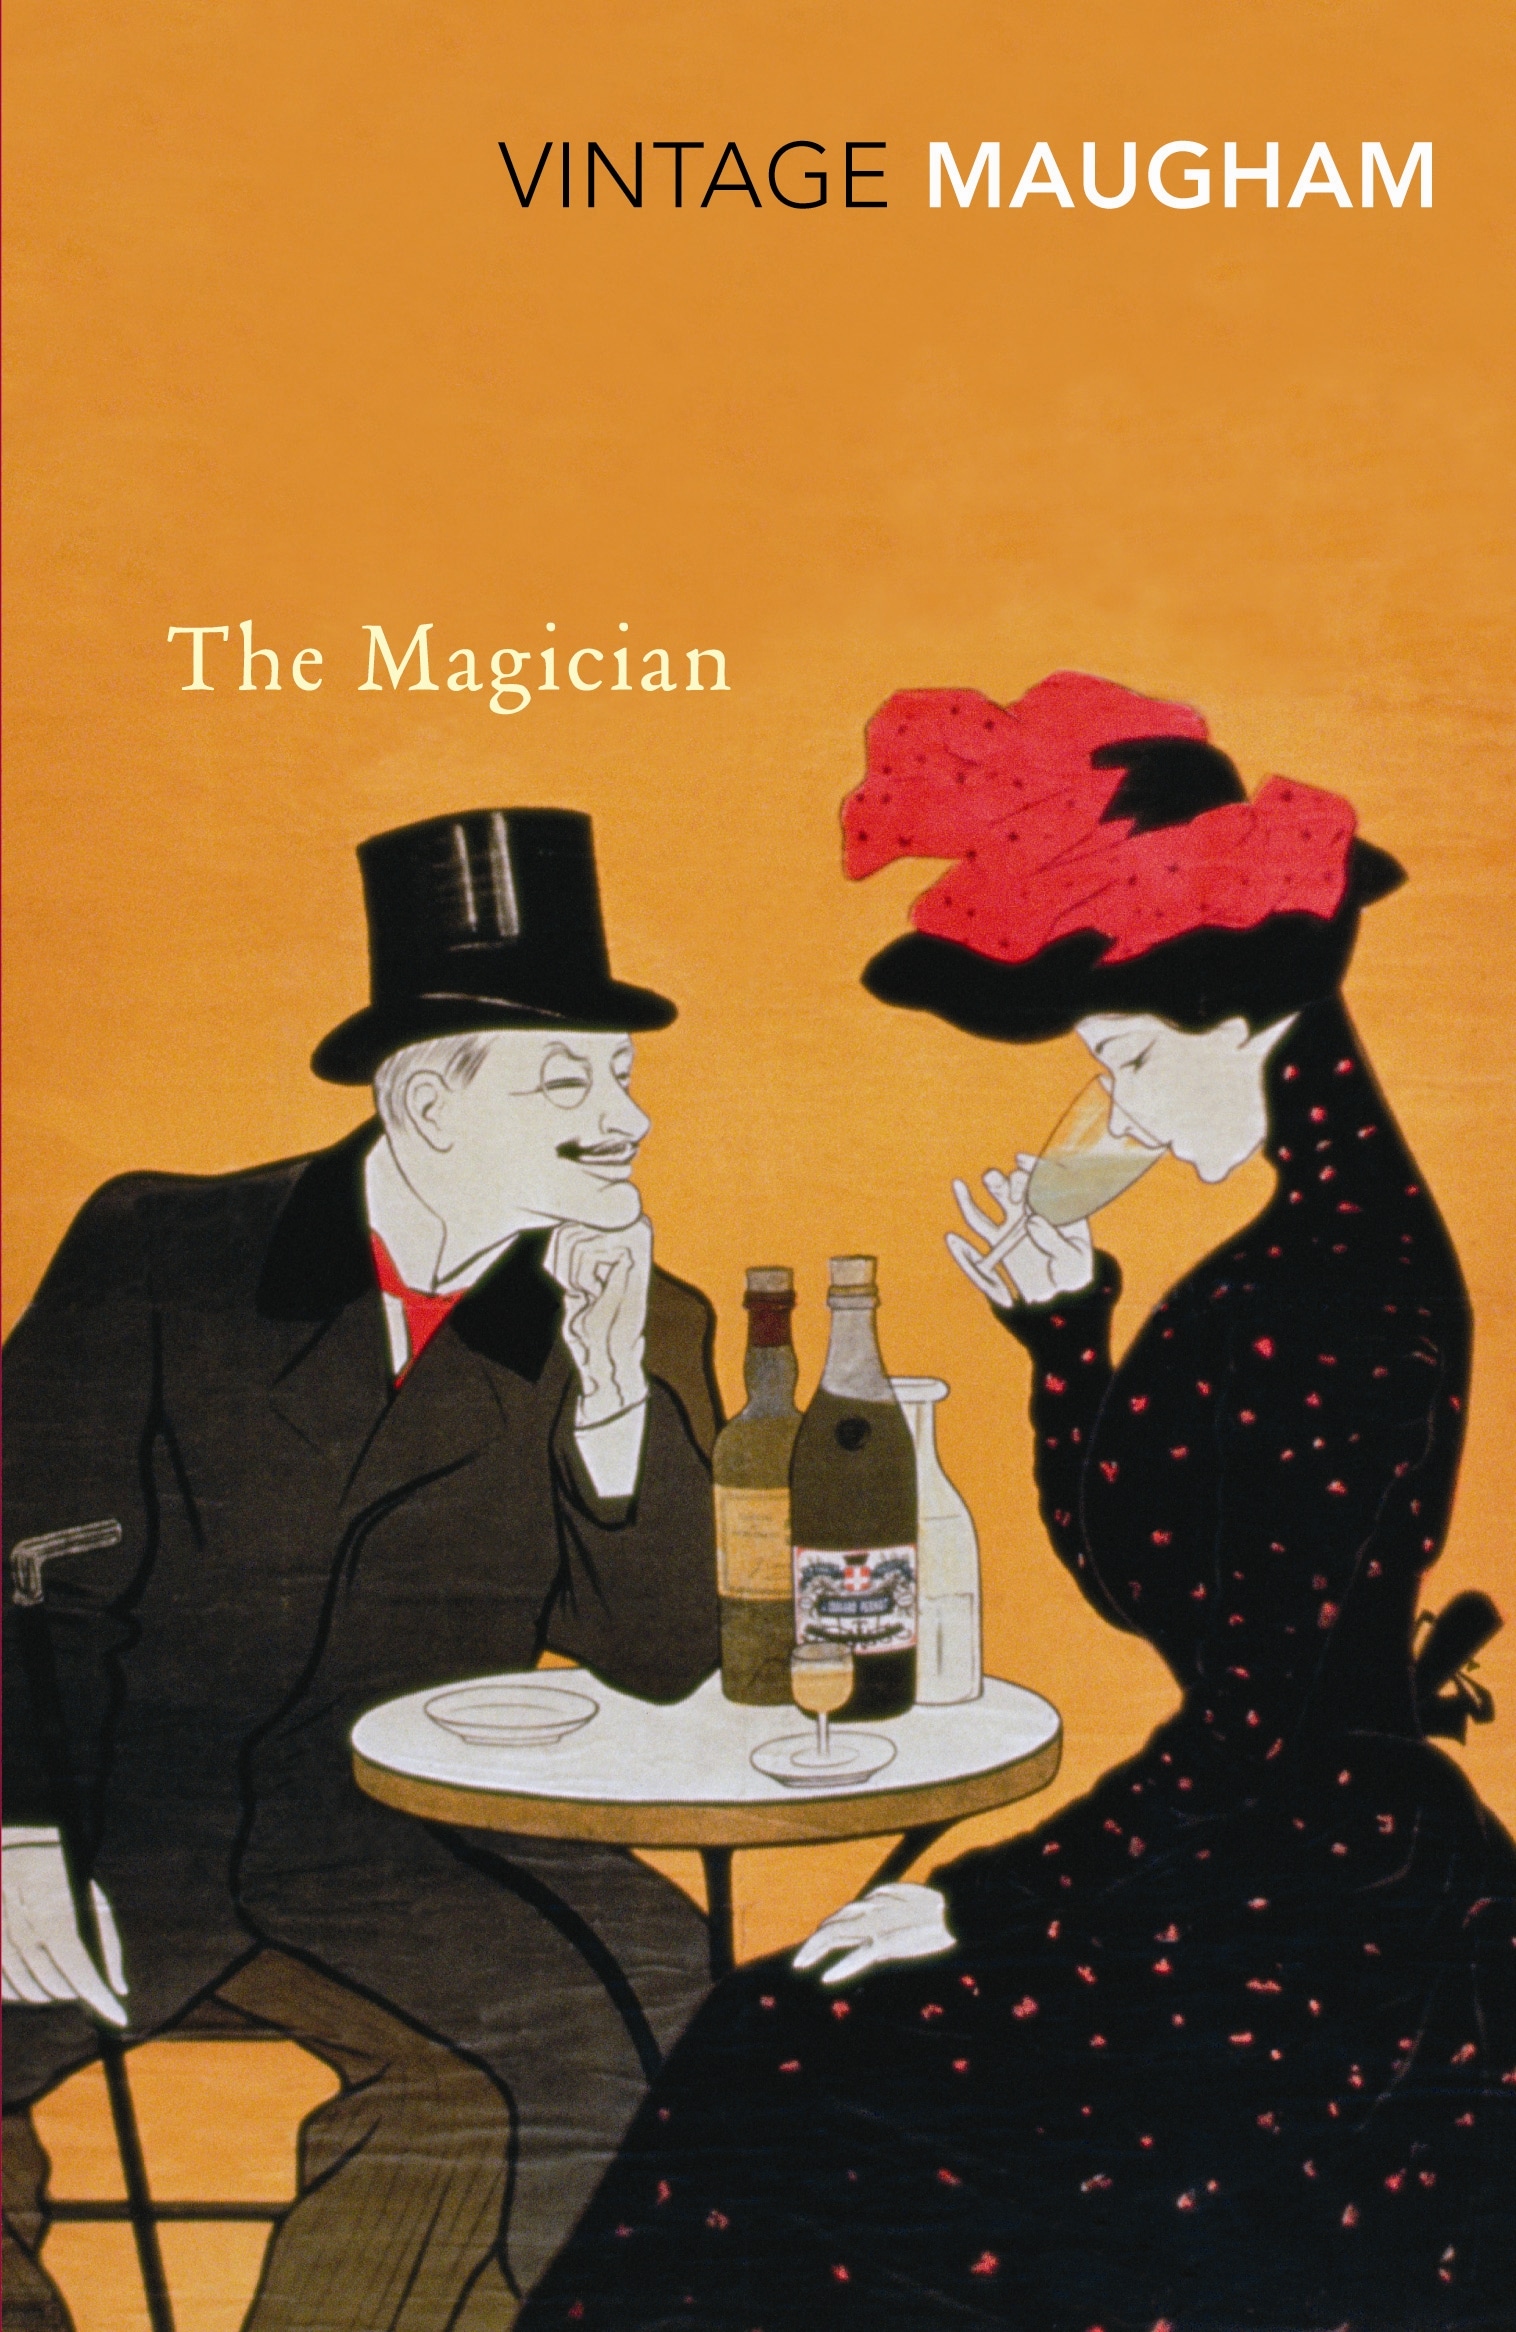 Book “The Magician” by W. Somerset Maugham — November 2, 2000